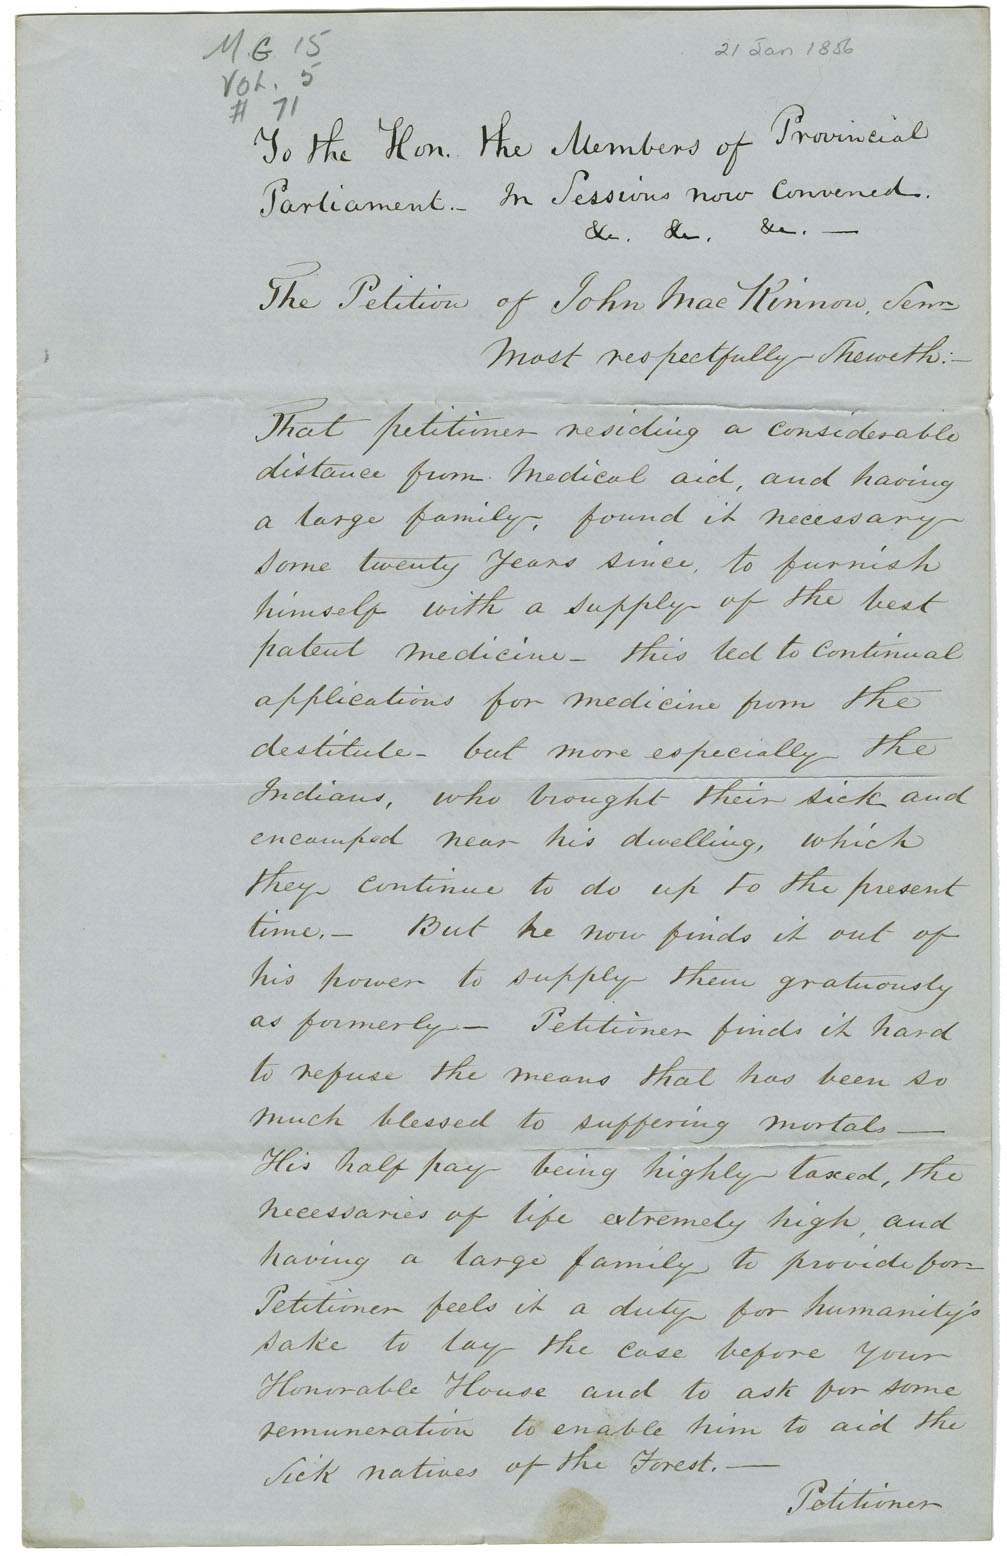 Petition of John MacKinnon of North sydney requesting money from government to support his habit of supplying free patent medicine to the Mi'kmaq.